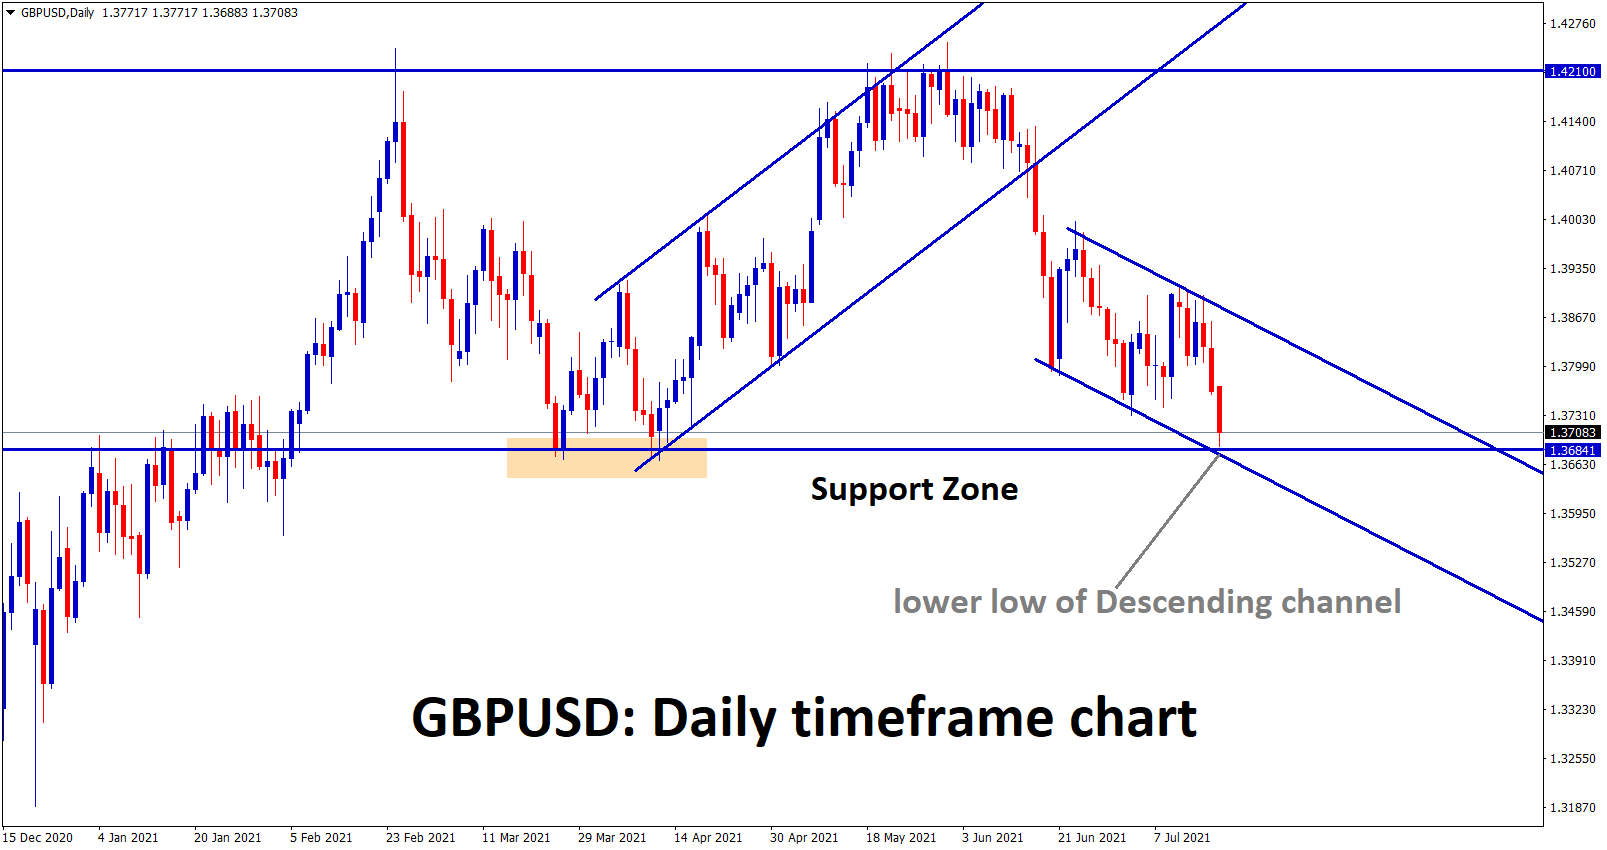 GBPUSD hits the support zone and also the lower low zone of the minor descending channel